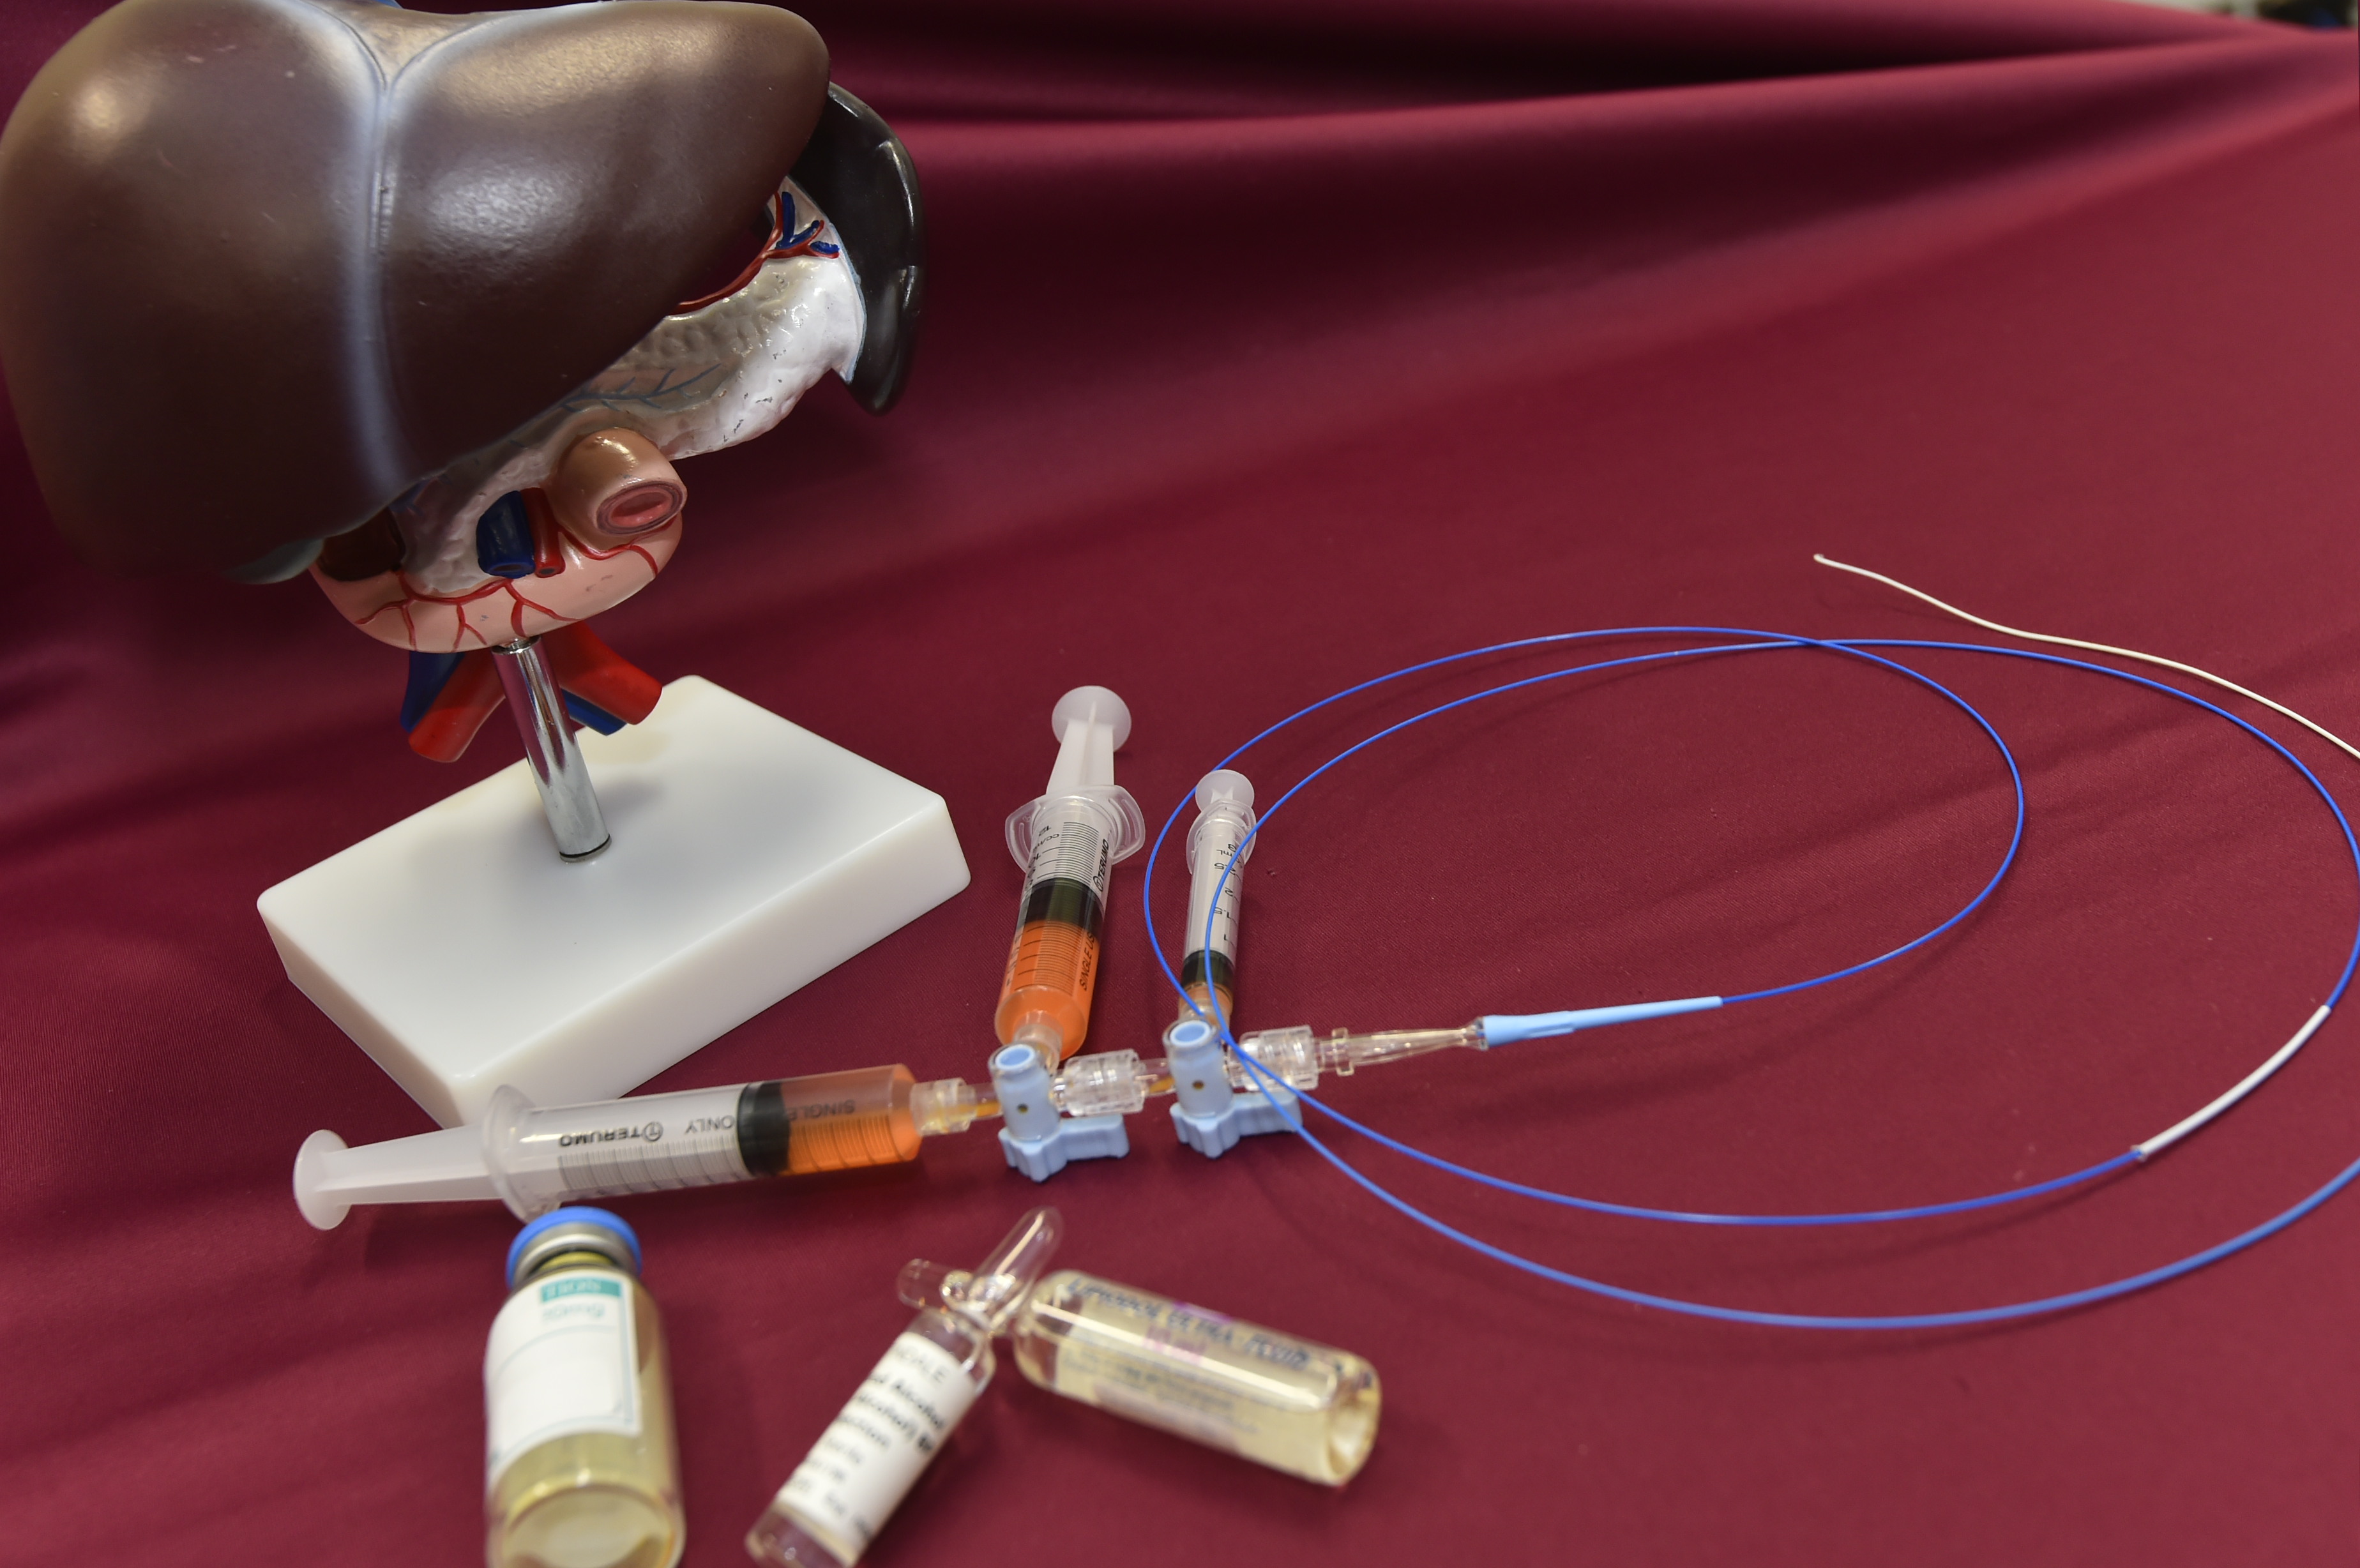 Ablative Chemoembolization can deliver concentrated chemotherapeutic drugs to liver cancer tissue through catheter and other devices. Combined with the effect of ethanol ablation and cutting off the blood supply of liver cancer tissue to cause ischemic necrosis, it can achieve multifold antitumour effect and improve the overall treatment outcome.